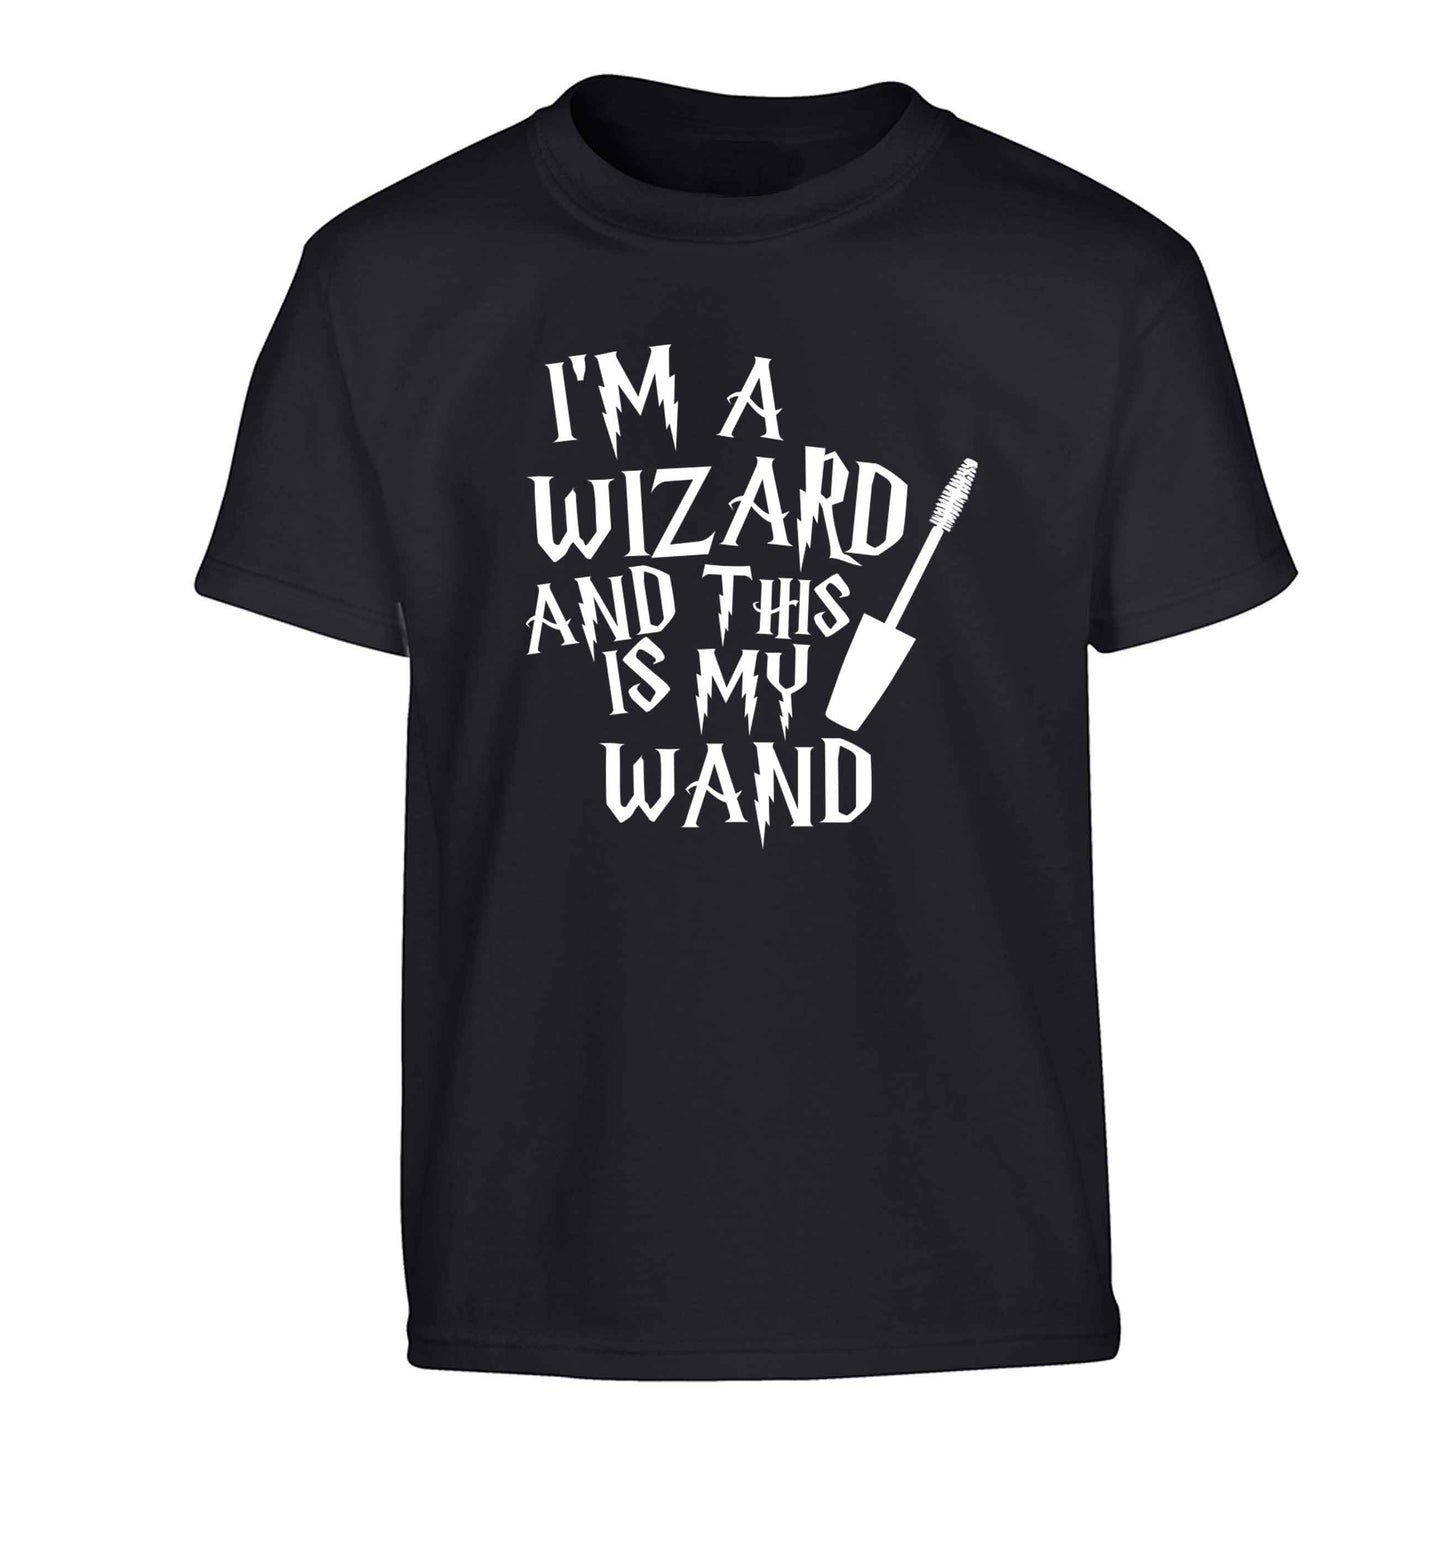 I'm a wizard and this is my wand Children's black Tshirt 12-13 Years